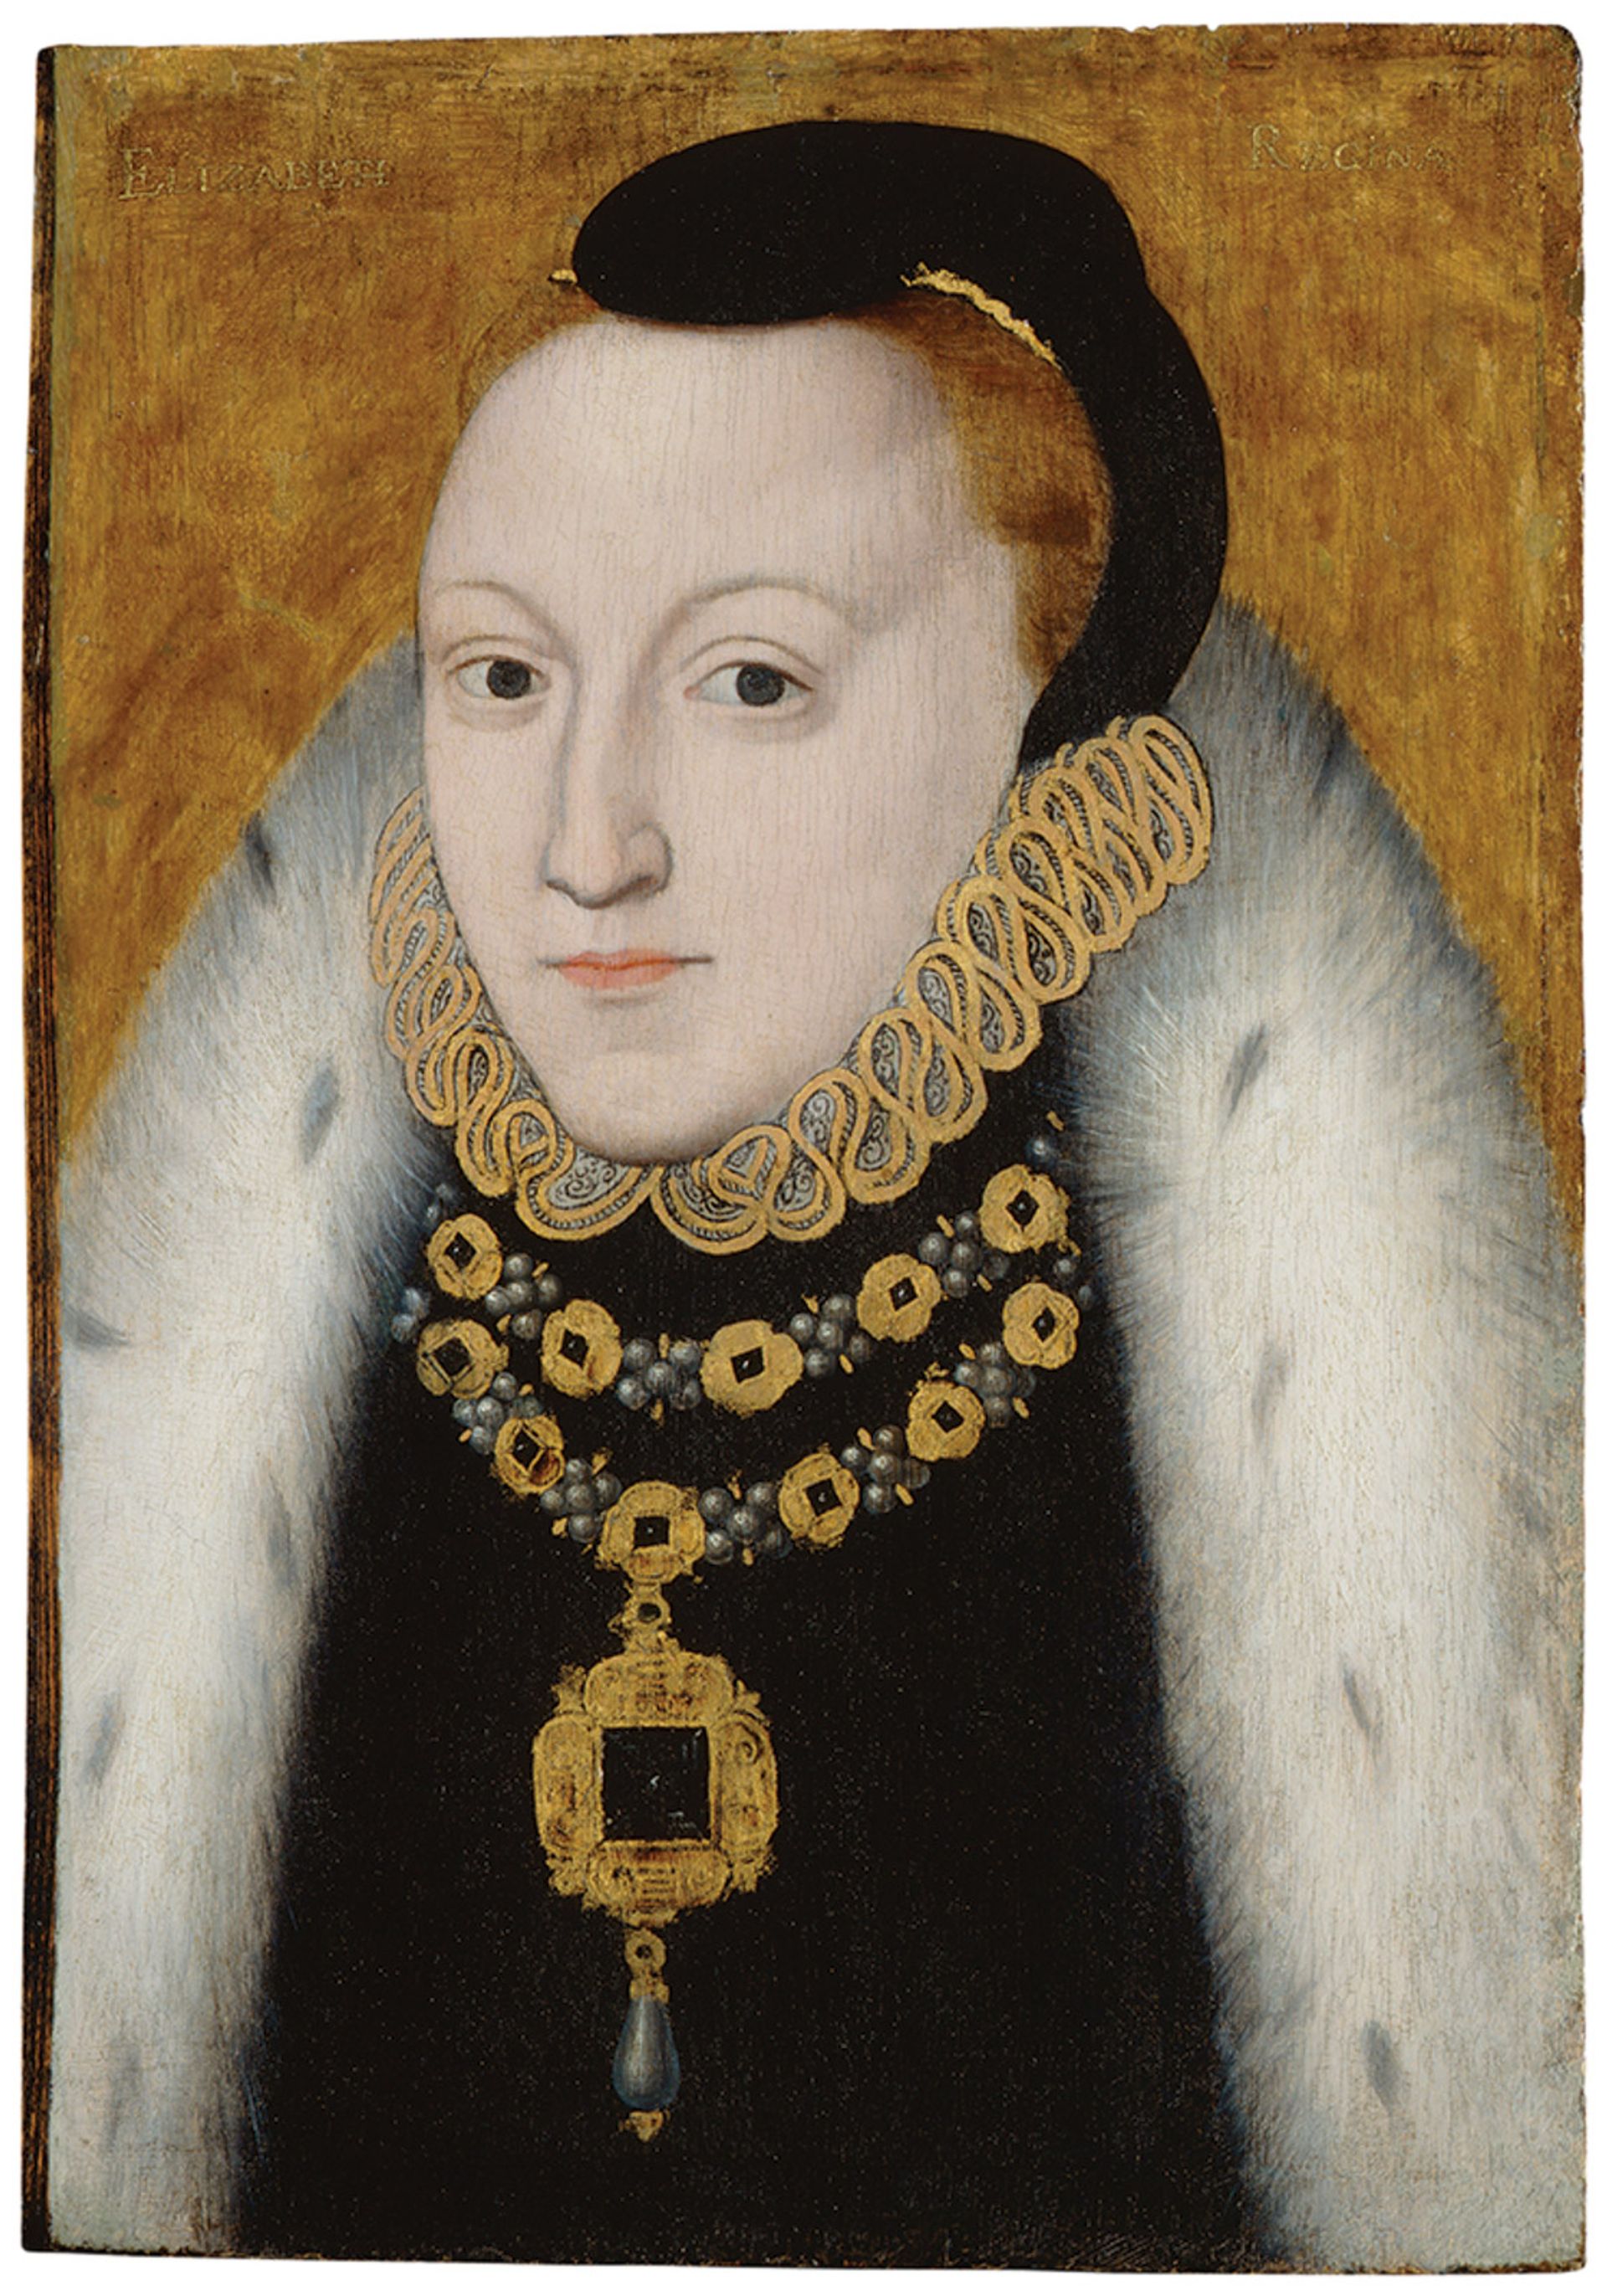 An early (1560) portrait of Queen Elizabeth I, with a“ faint smile and a wary look in her eyes”, by an unknown artist

© National Portrait Gallery, London





